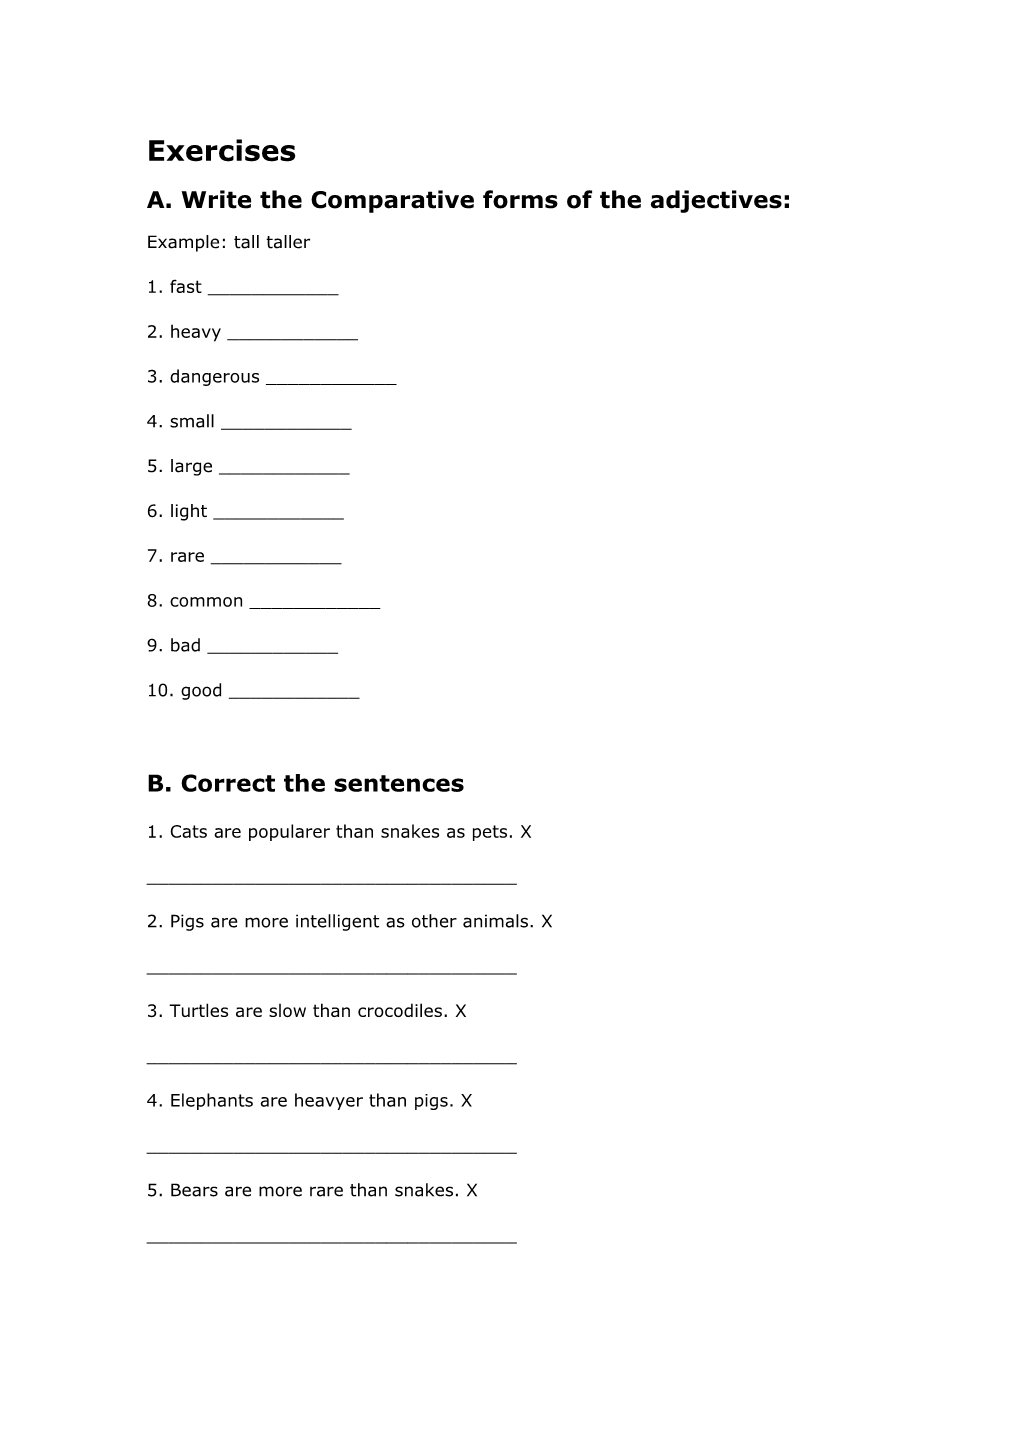 A. Write the Comparative Forms of the Adjectives